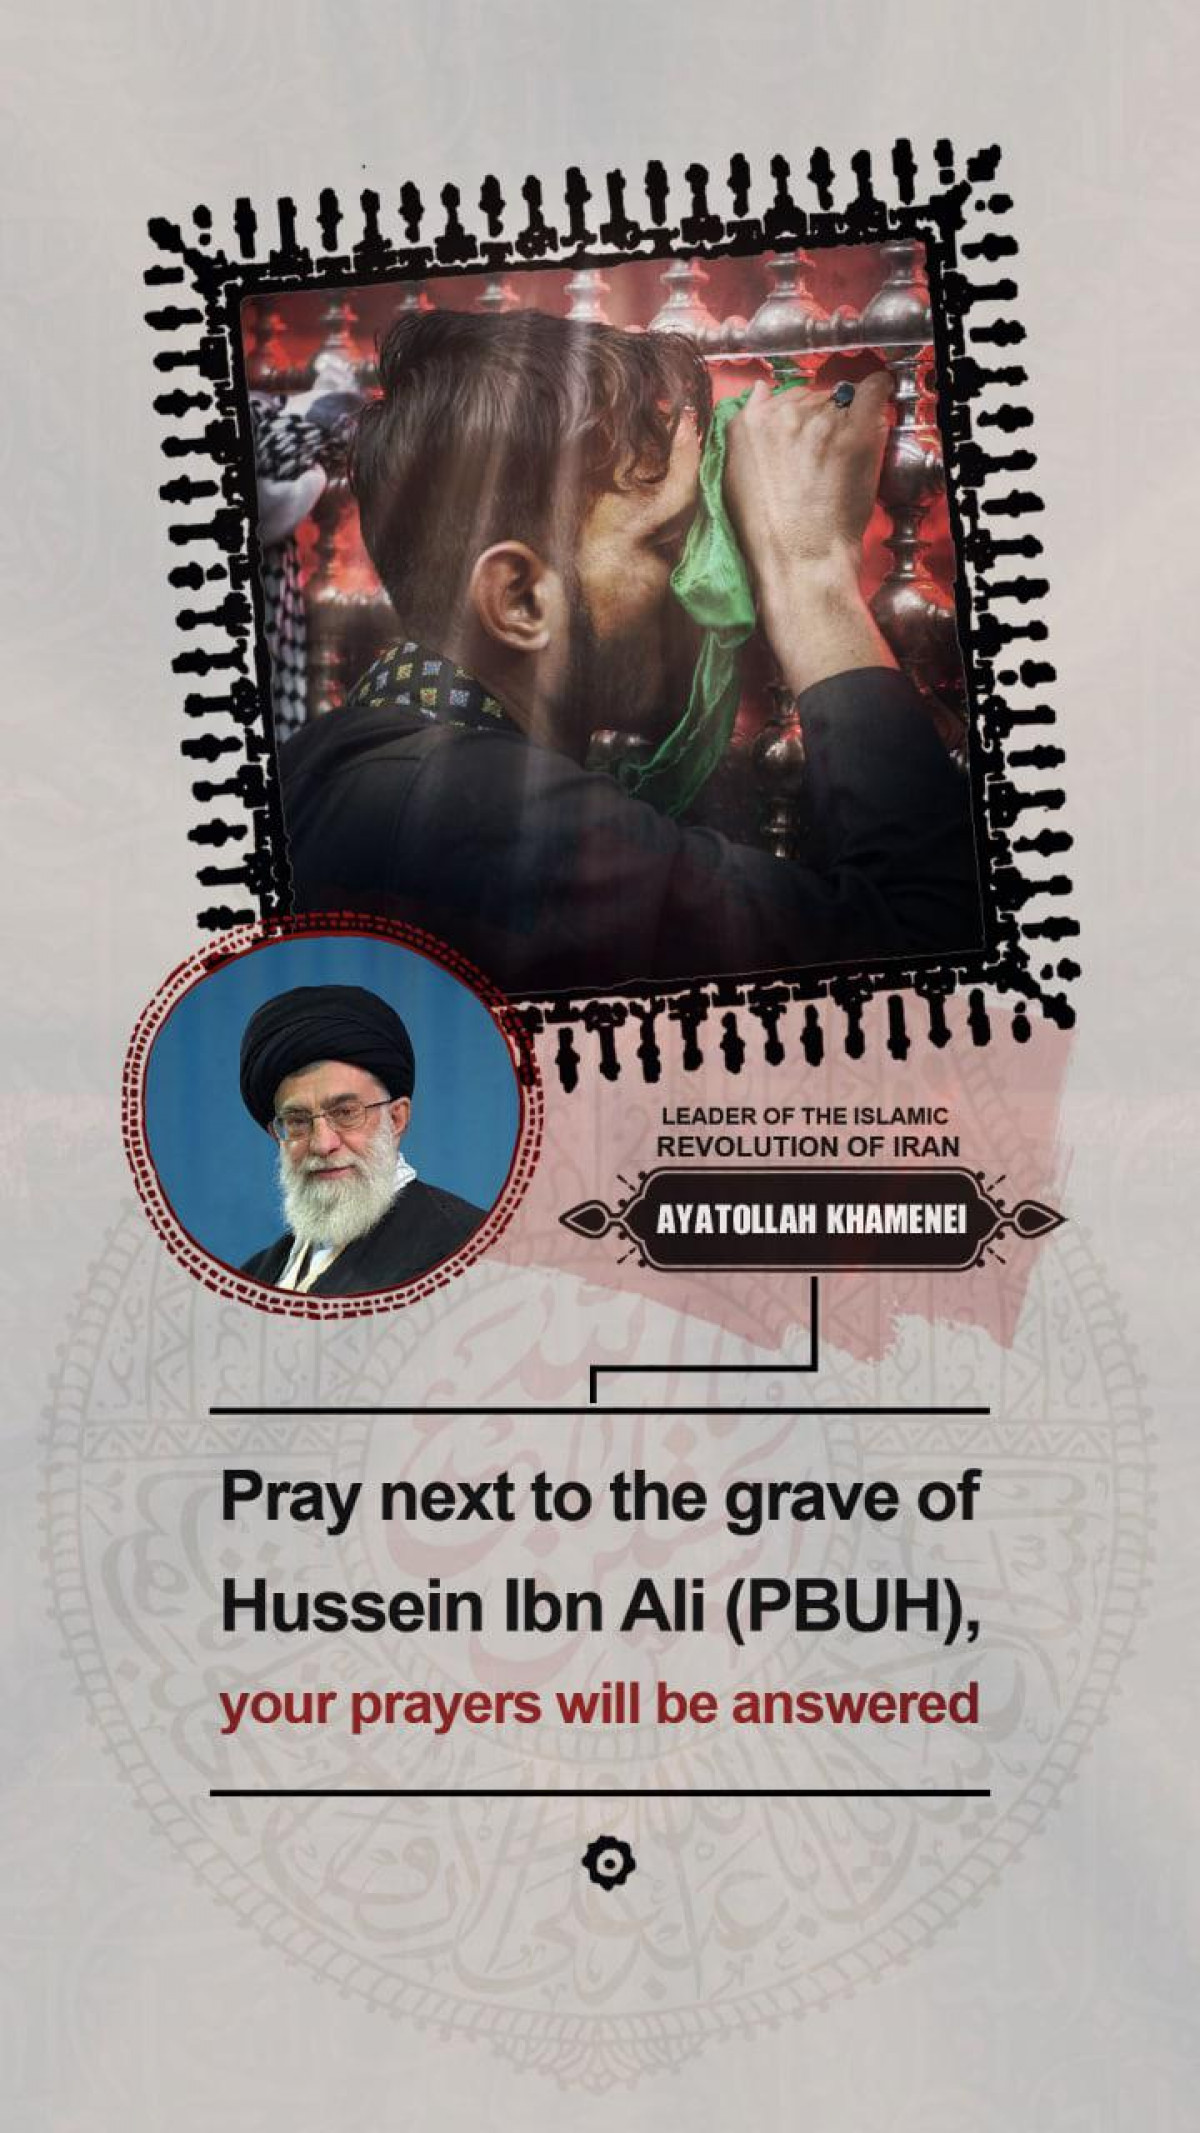 Pray next to the grave of Hussein Ibn Ali (PBUH), your prayers will be answered